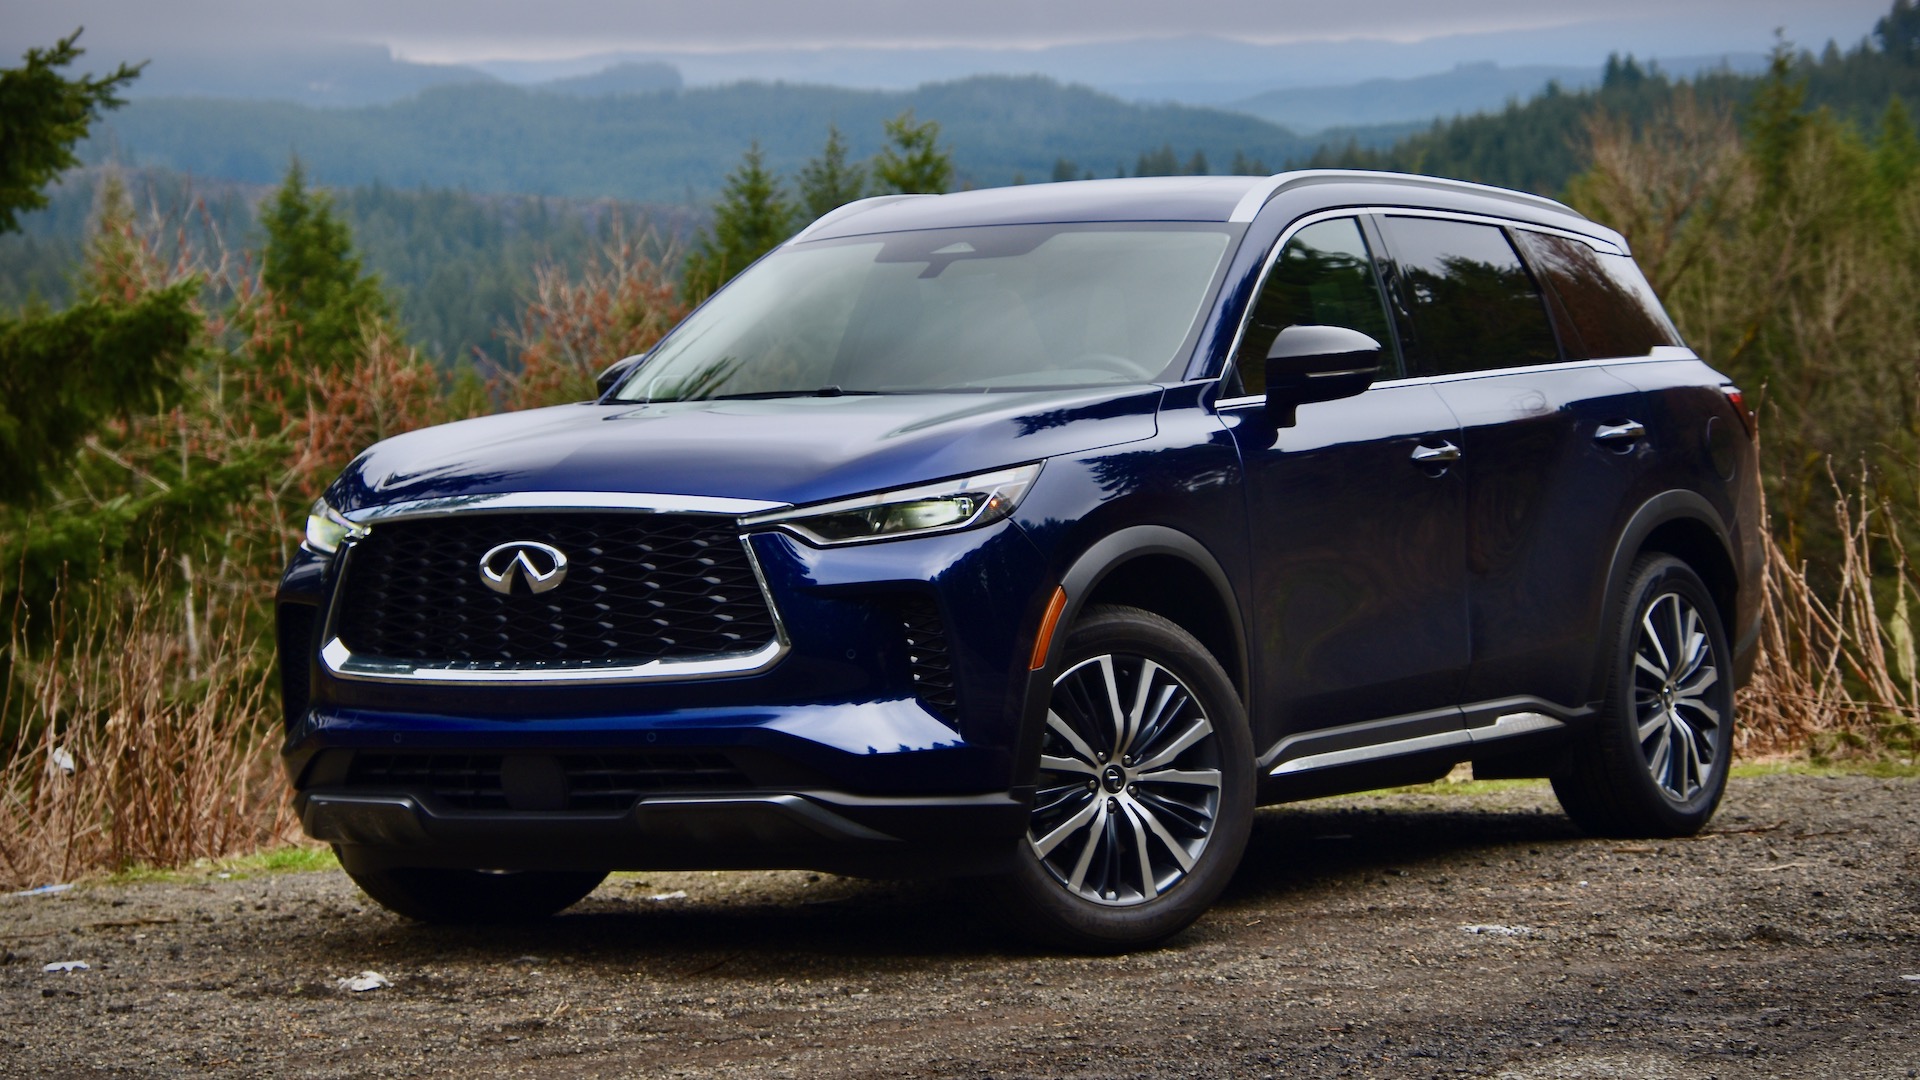 2023 Infiniti QX60 Sensory AWD in dark blue. The SUV is against a forested, mountainous background